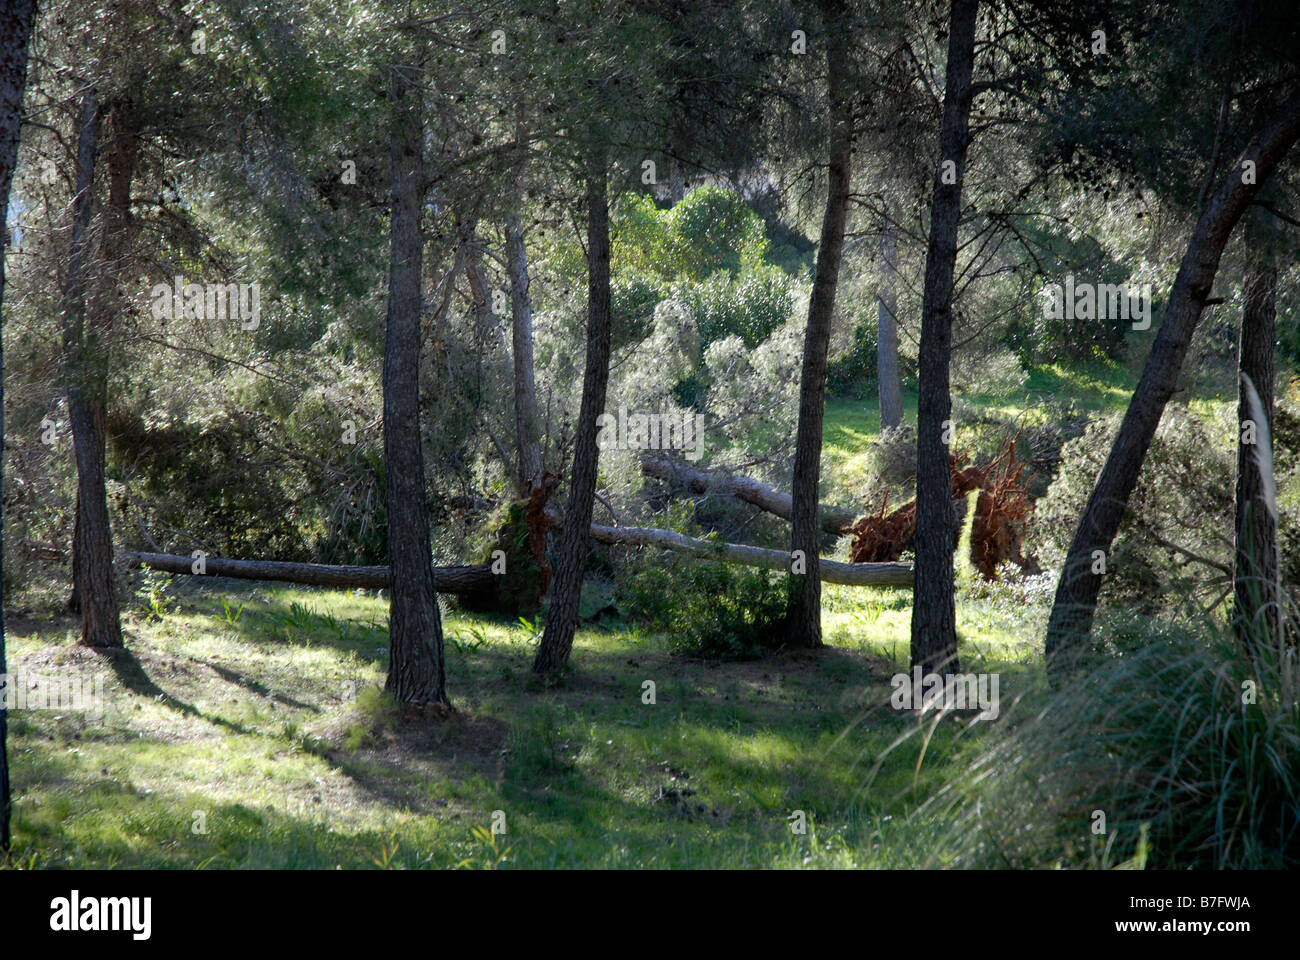 pine trees uprooted in hurricane force winds, Jan 2009, Javea, Alicante Province, Comunidad Valenciana, Spain Stock Photo